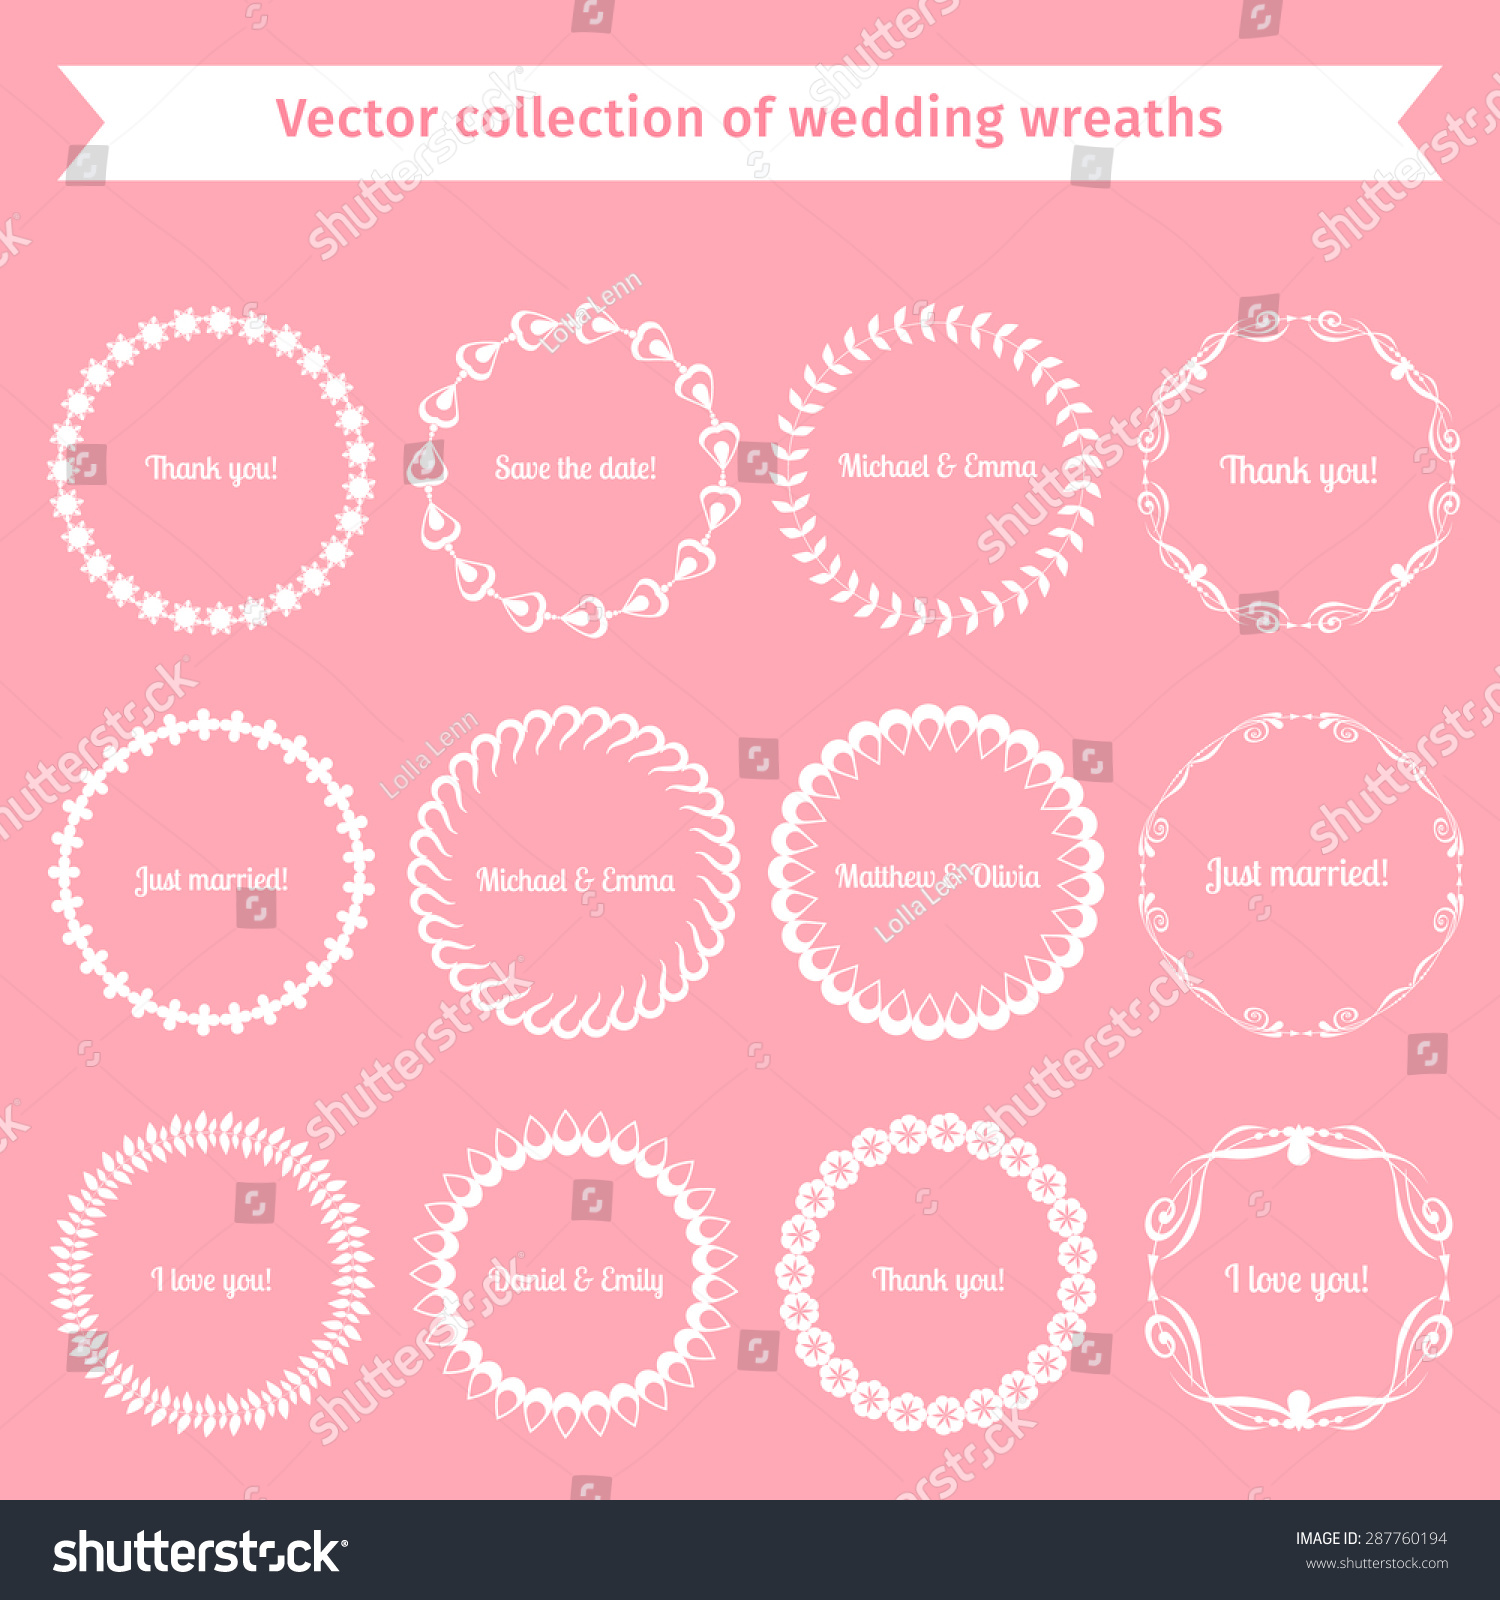 Collection Wedding Wreaths Vector Illustration Stock Vector Royalty Free 287760194 Shutterstock 4179